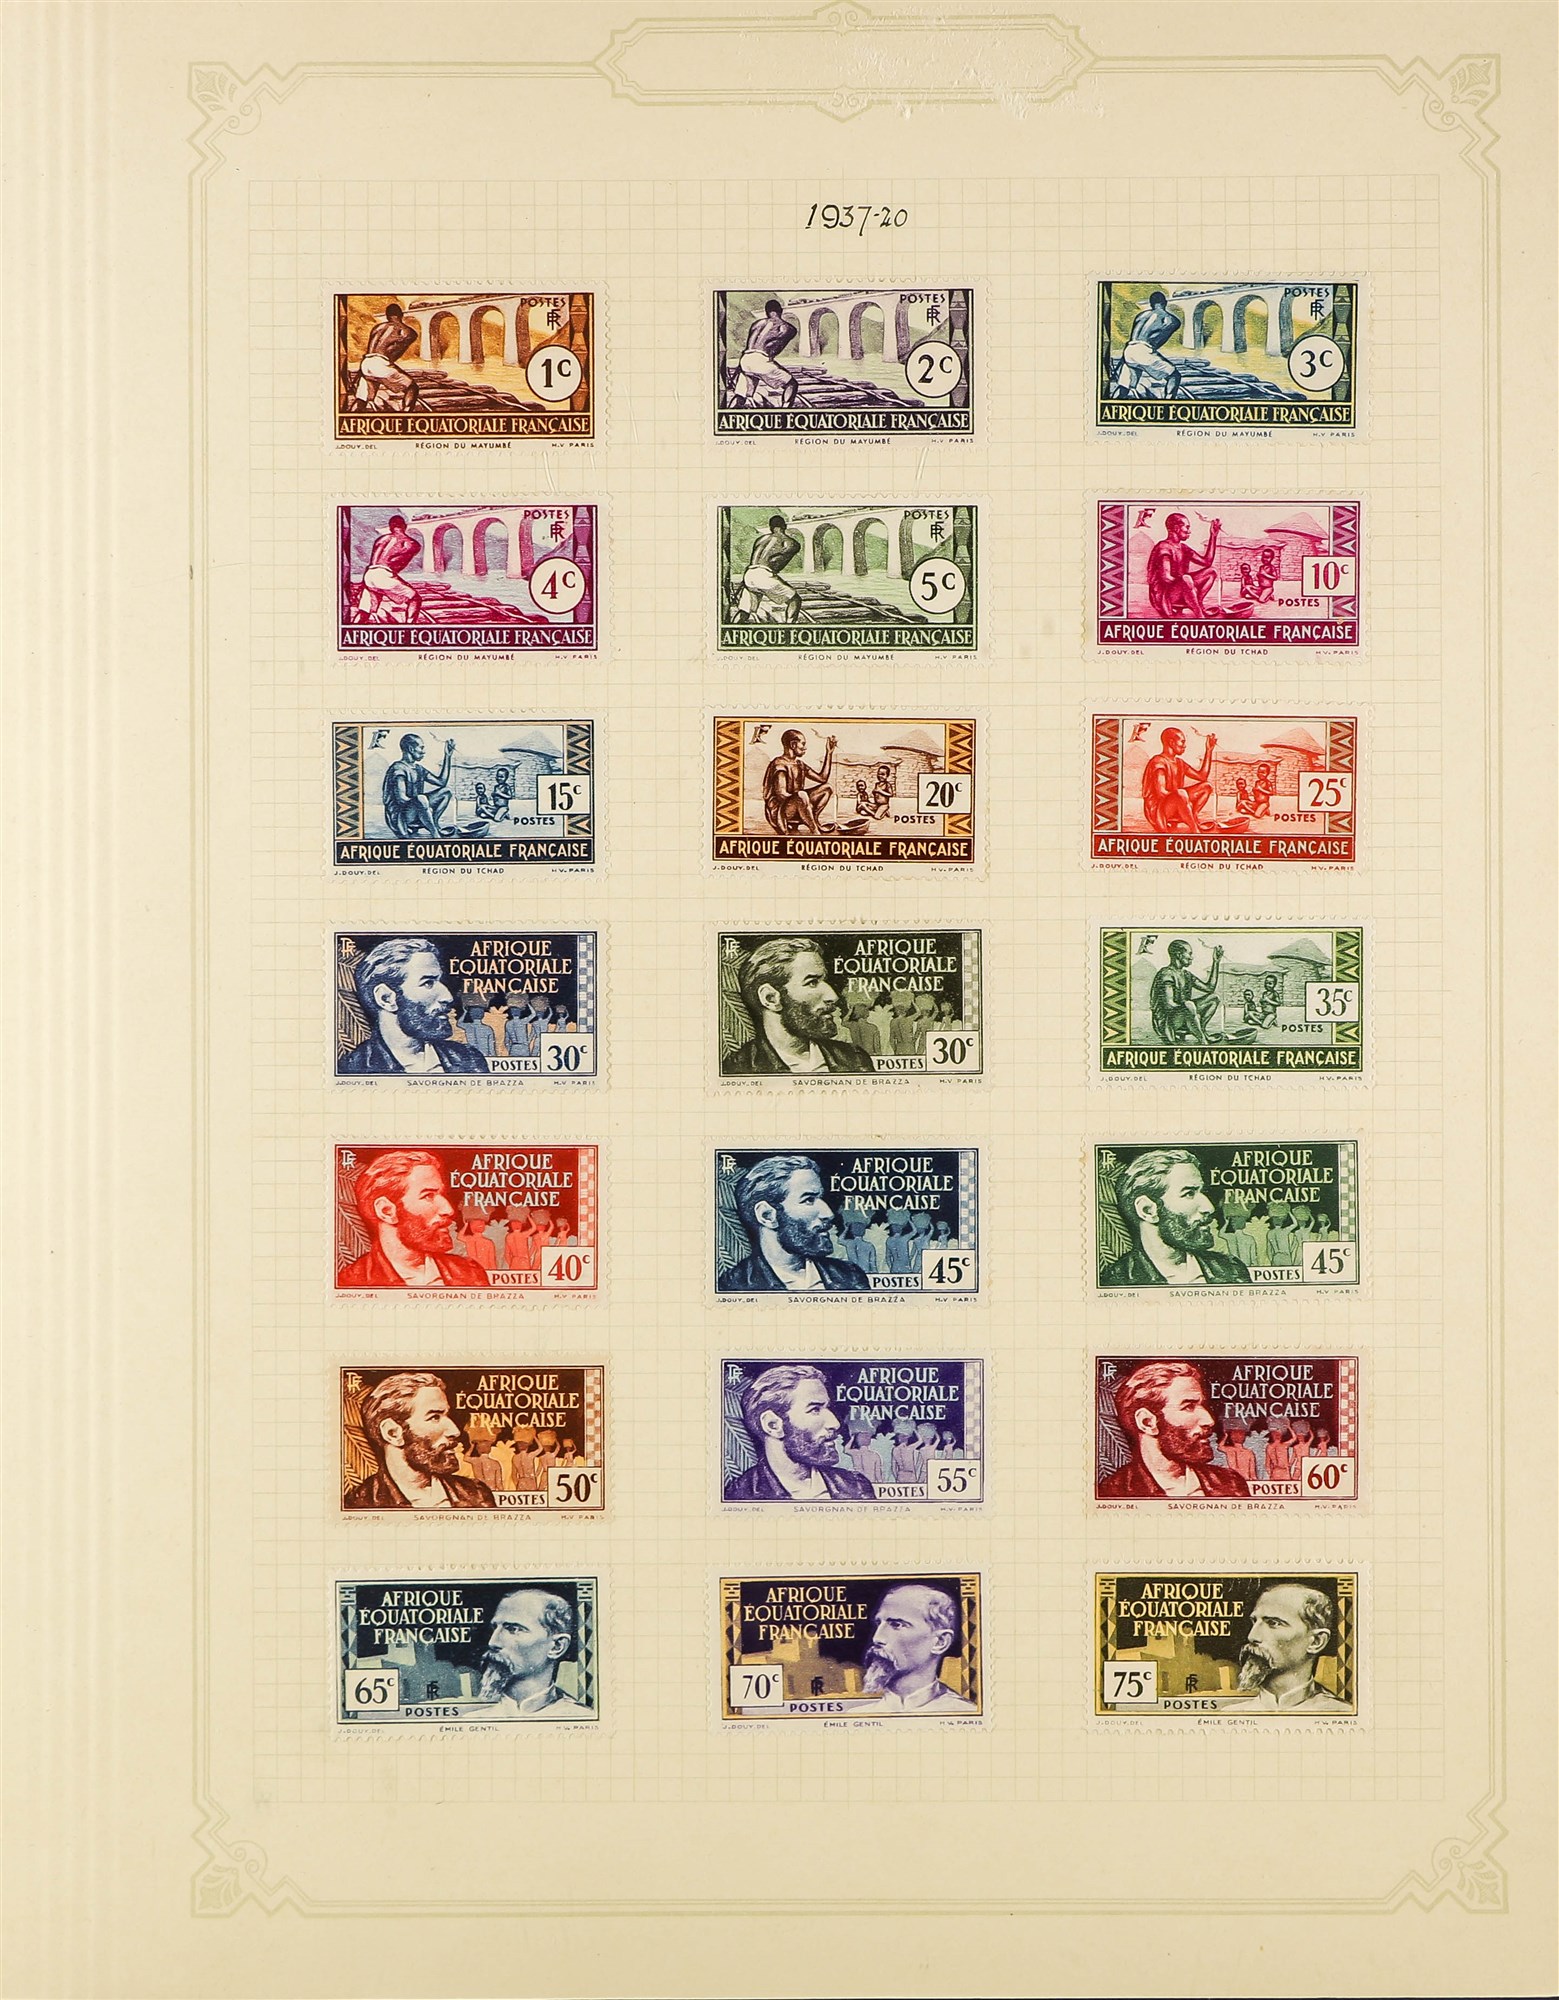 FRENCH COLONIES EQUATORIAL AFRICA 1936 - 1957 comprehensive collection of mint stamps on album pages - Image 4 of 16